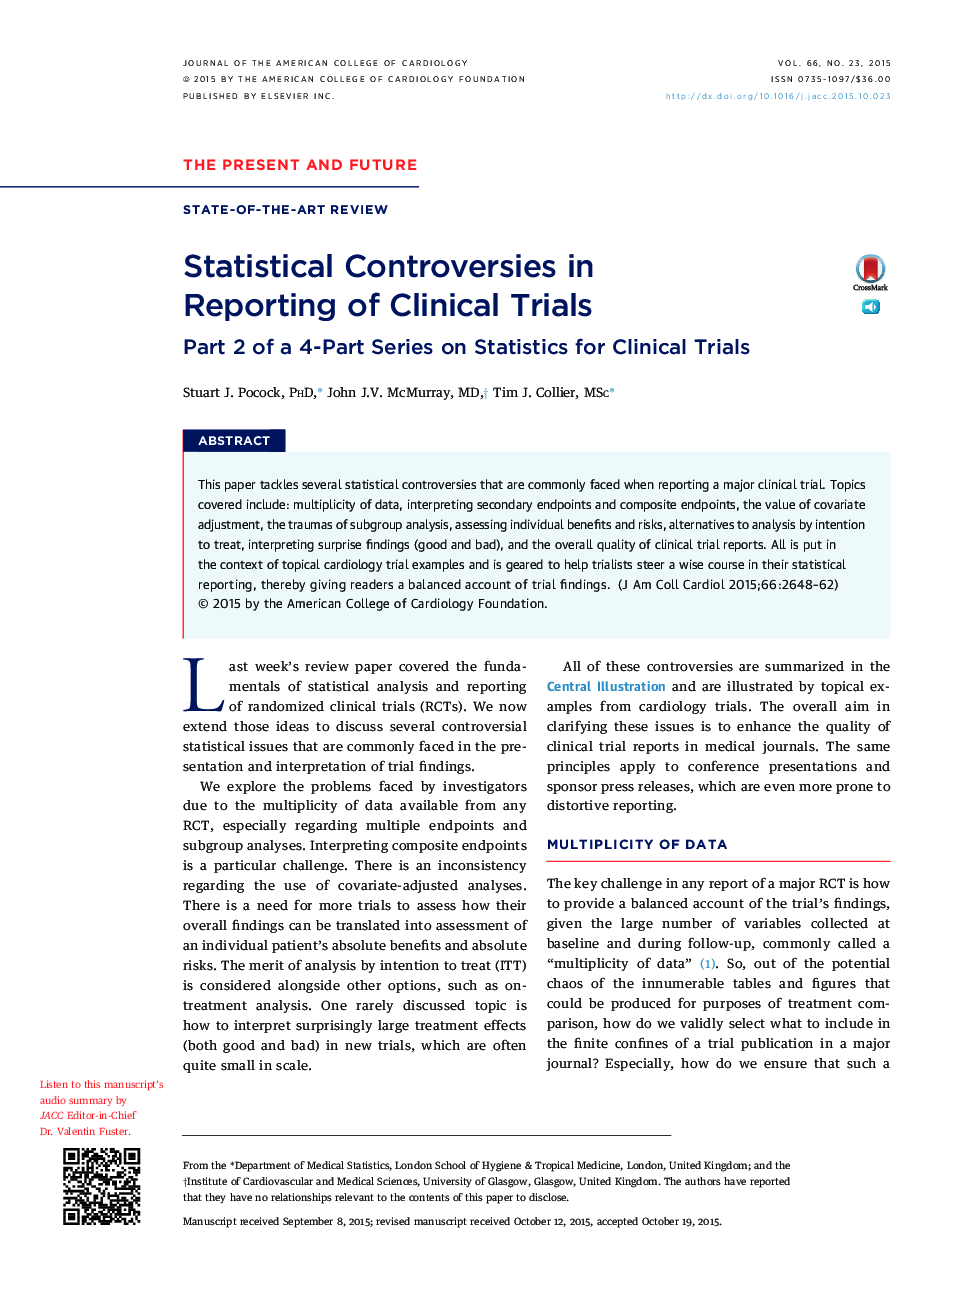 Statistical Controversies in ReportingÂ ofÂ Clinical Trials: Part 2 of a 4-Part Series on Statistics for Clinical Trials